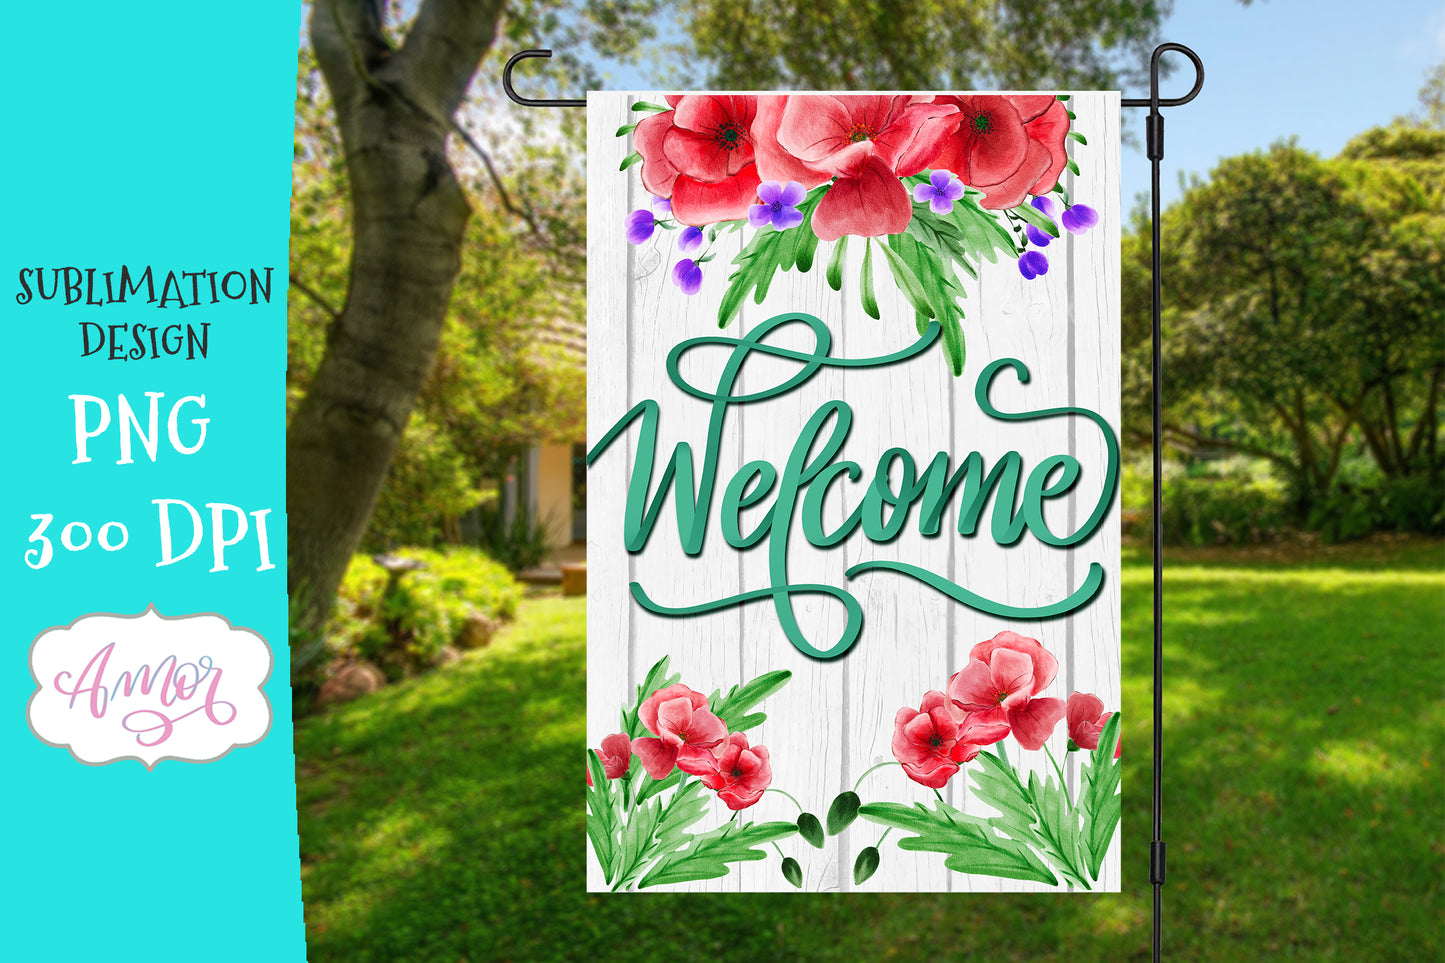 Welcome Garden Flag Sublimation Design with a floral wreath